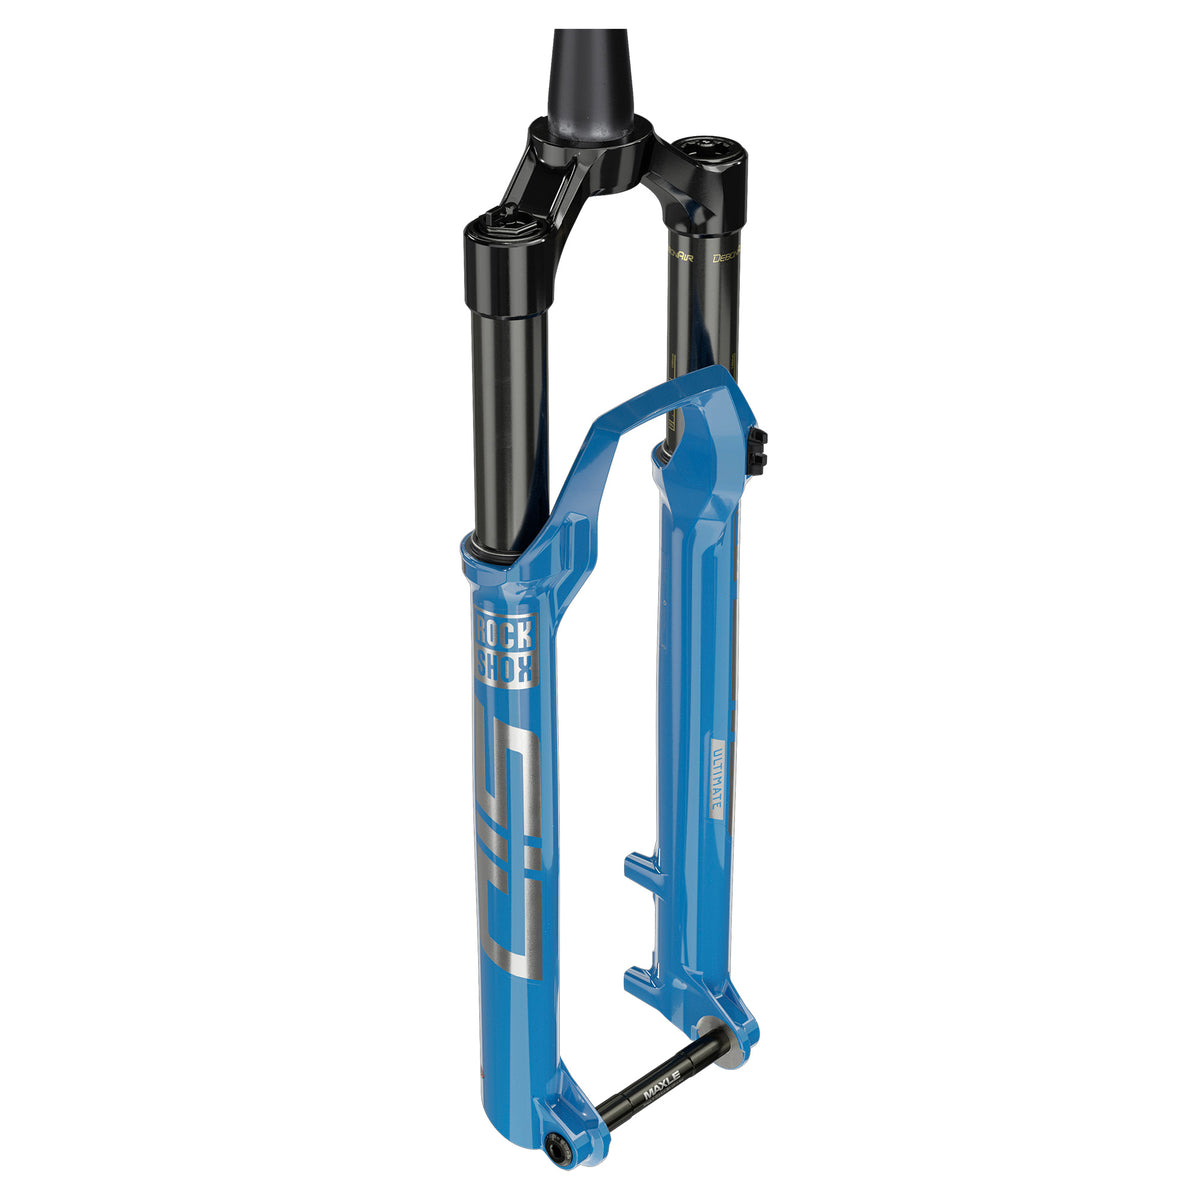 Rockshox Fork Sid Ultimate Race Day - Remote 29" Boostô15X110 44Offset Tapered Debonair (Includes Bolt On Fender, Star Nut, Maxle Stealth & Oneloc Remote) C1